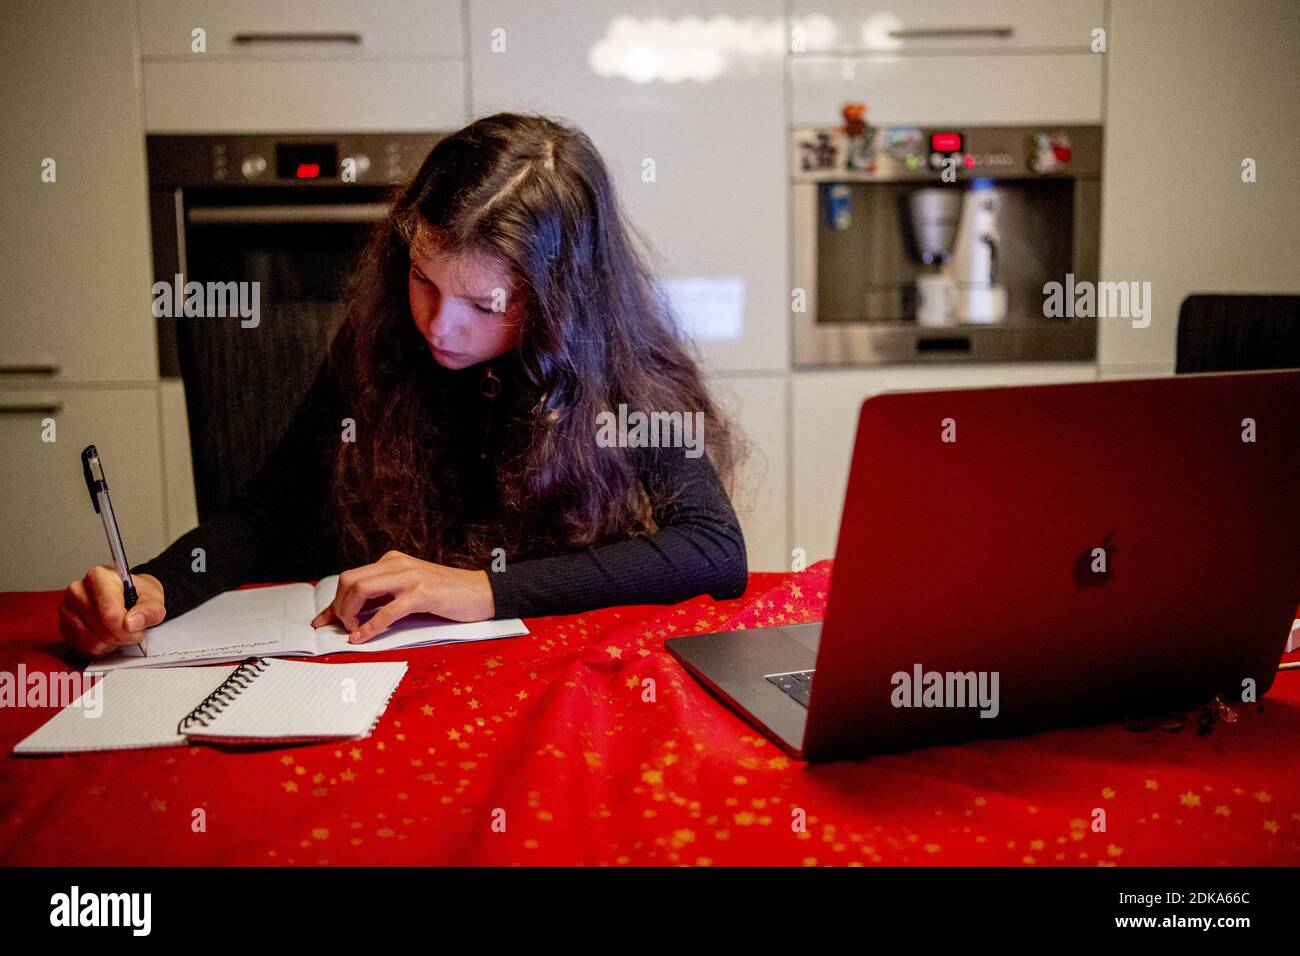 A schoolgirl works at home on December 15, 2020 in Rotterdam, Netherlands. Dutch Prime Minister Mark Rutte informed the public that due to an increase in coronavirus infections and Covid-19 hospitalizations, the Netherlands will enter a lockdown starting at midnight for five weeks. Among other measures, starting on Wednesday, all schools in the Netherlands will be closed. 'Until January 18, distance education will become the norm. That is a radical, but inevitable decision. Exceptions apply to students in their final year and students who need extra help. This also applies to children with par Stock Photo